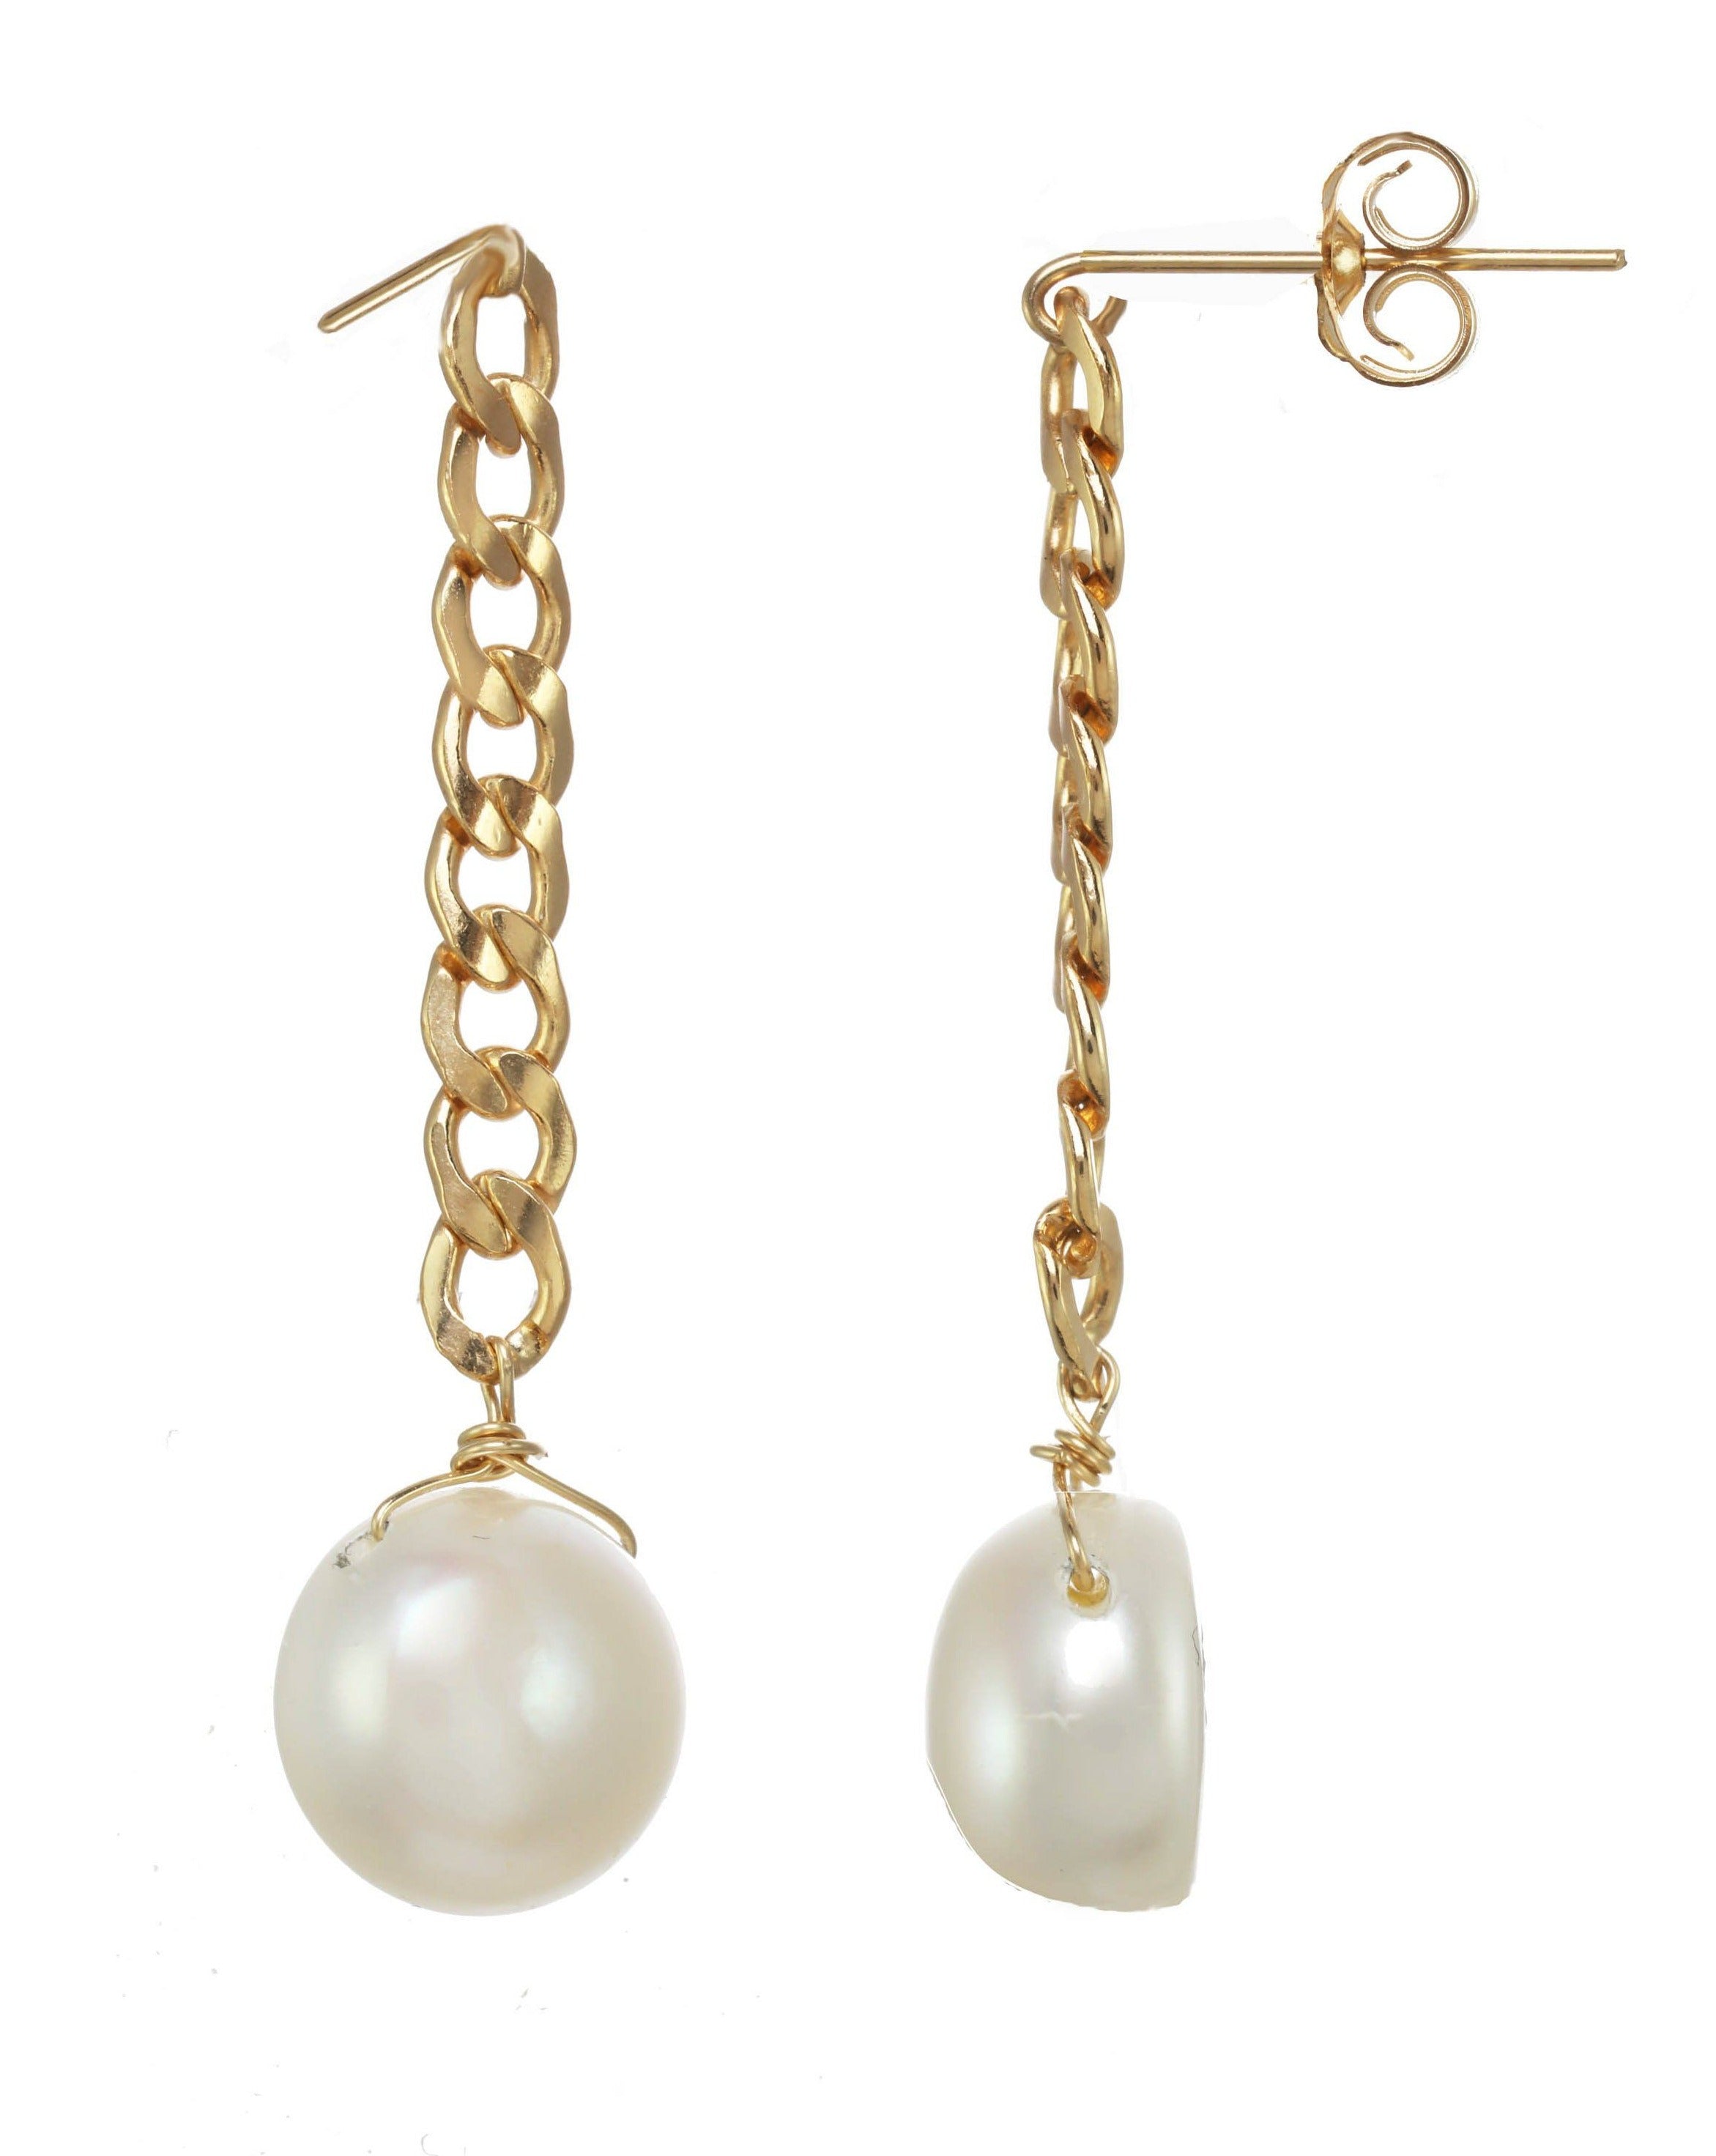 Aubrey Earrings by Kozakh. Chain style drop earrings in 14K Gold Filled with Freshwater Pearls. Earring drop length is 1.5 inches.